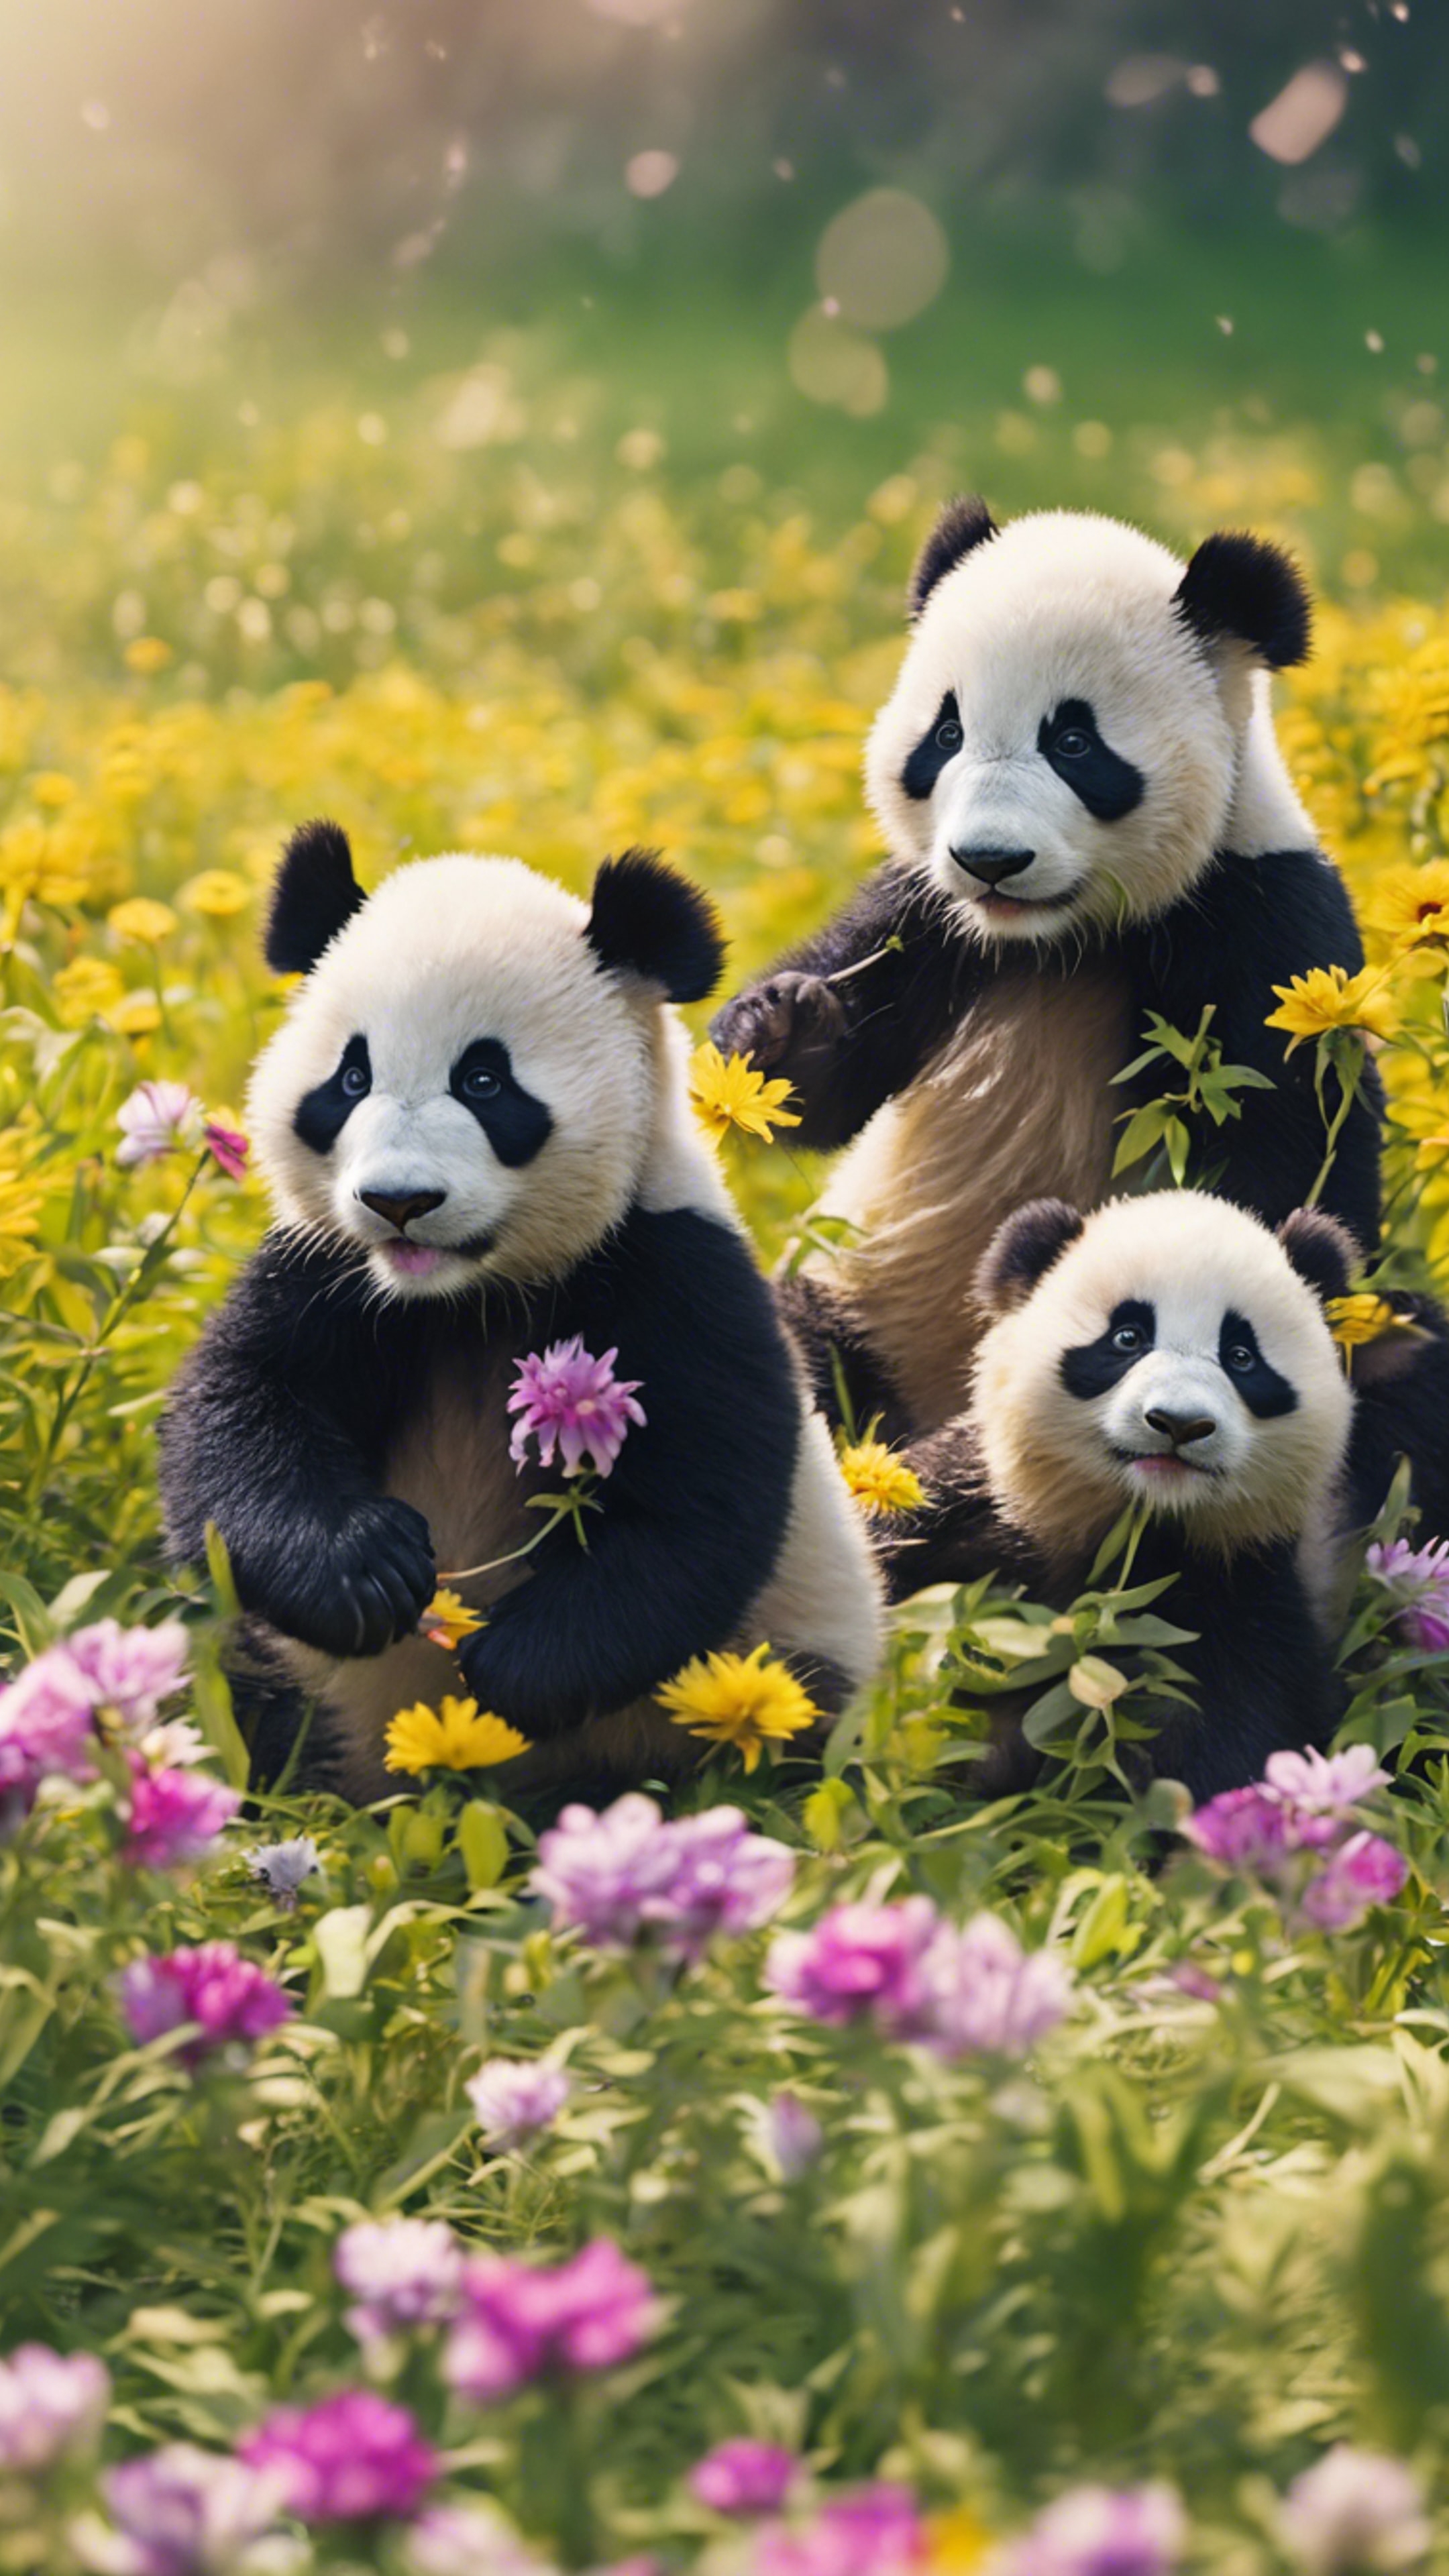 A group of lively panda cubs merrily playing tag in a field full of bright spring flowers. ផ្ទាំង​រូបភាព[9de4fa100eef4aefa43d]